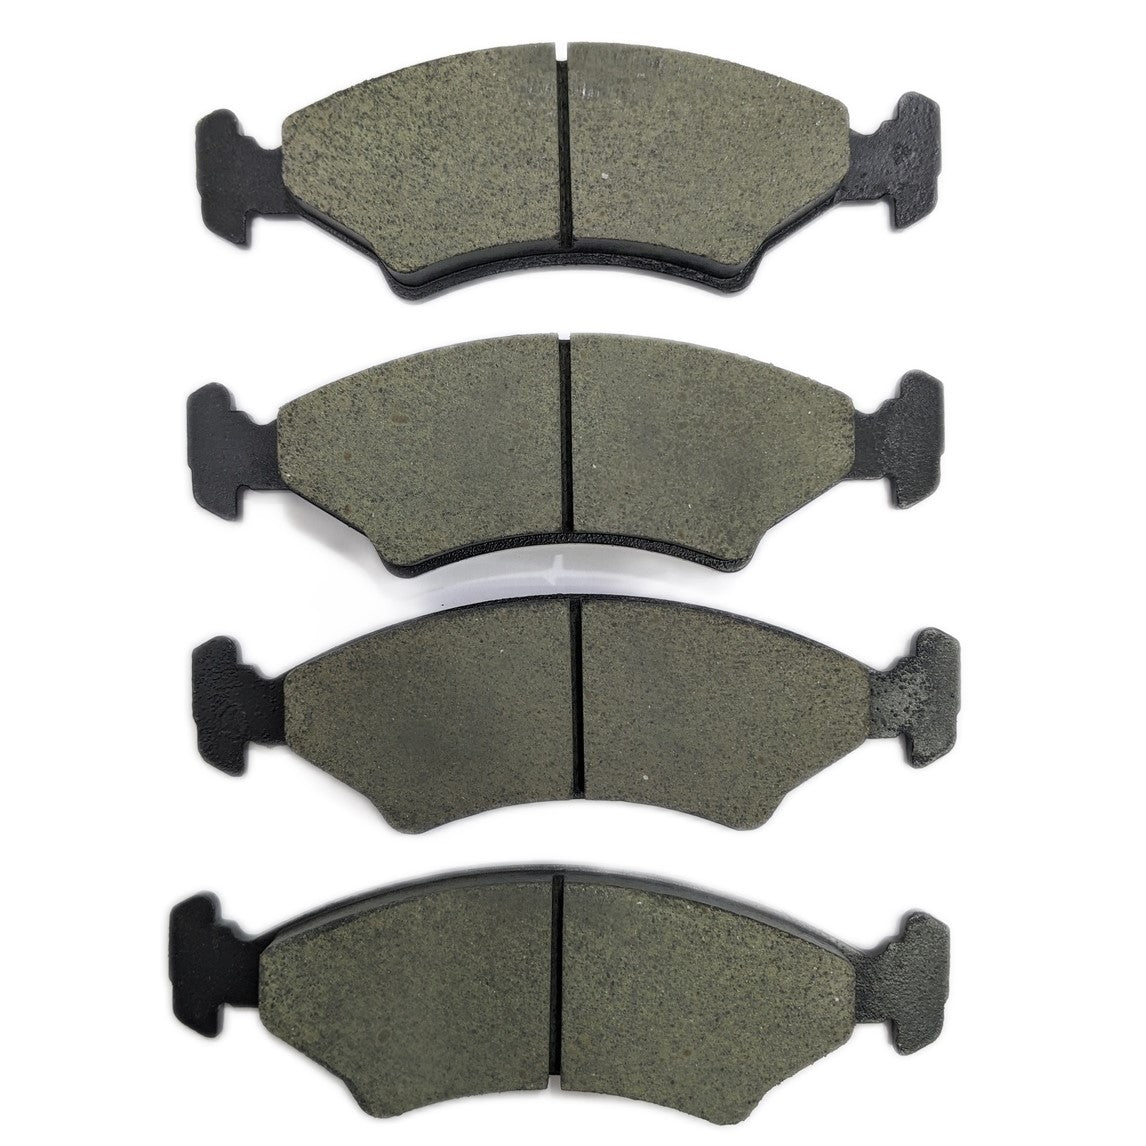 EZ Loader 8", 10", or 12" Disc Brake Pads Includes 2 Pairs (1 axle) 300-036928